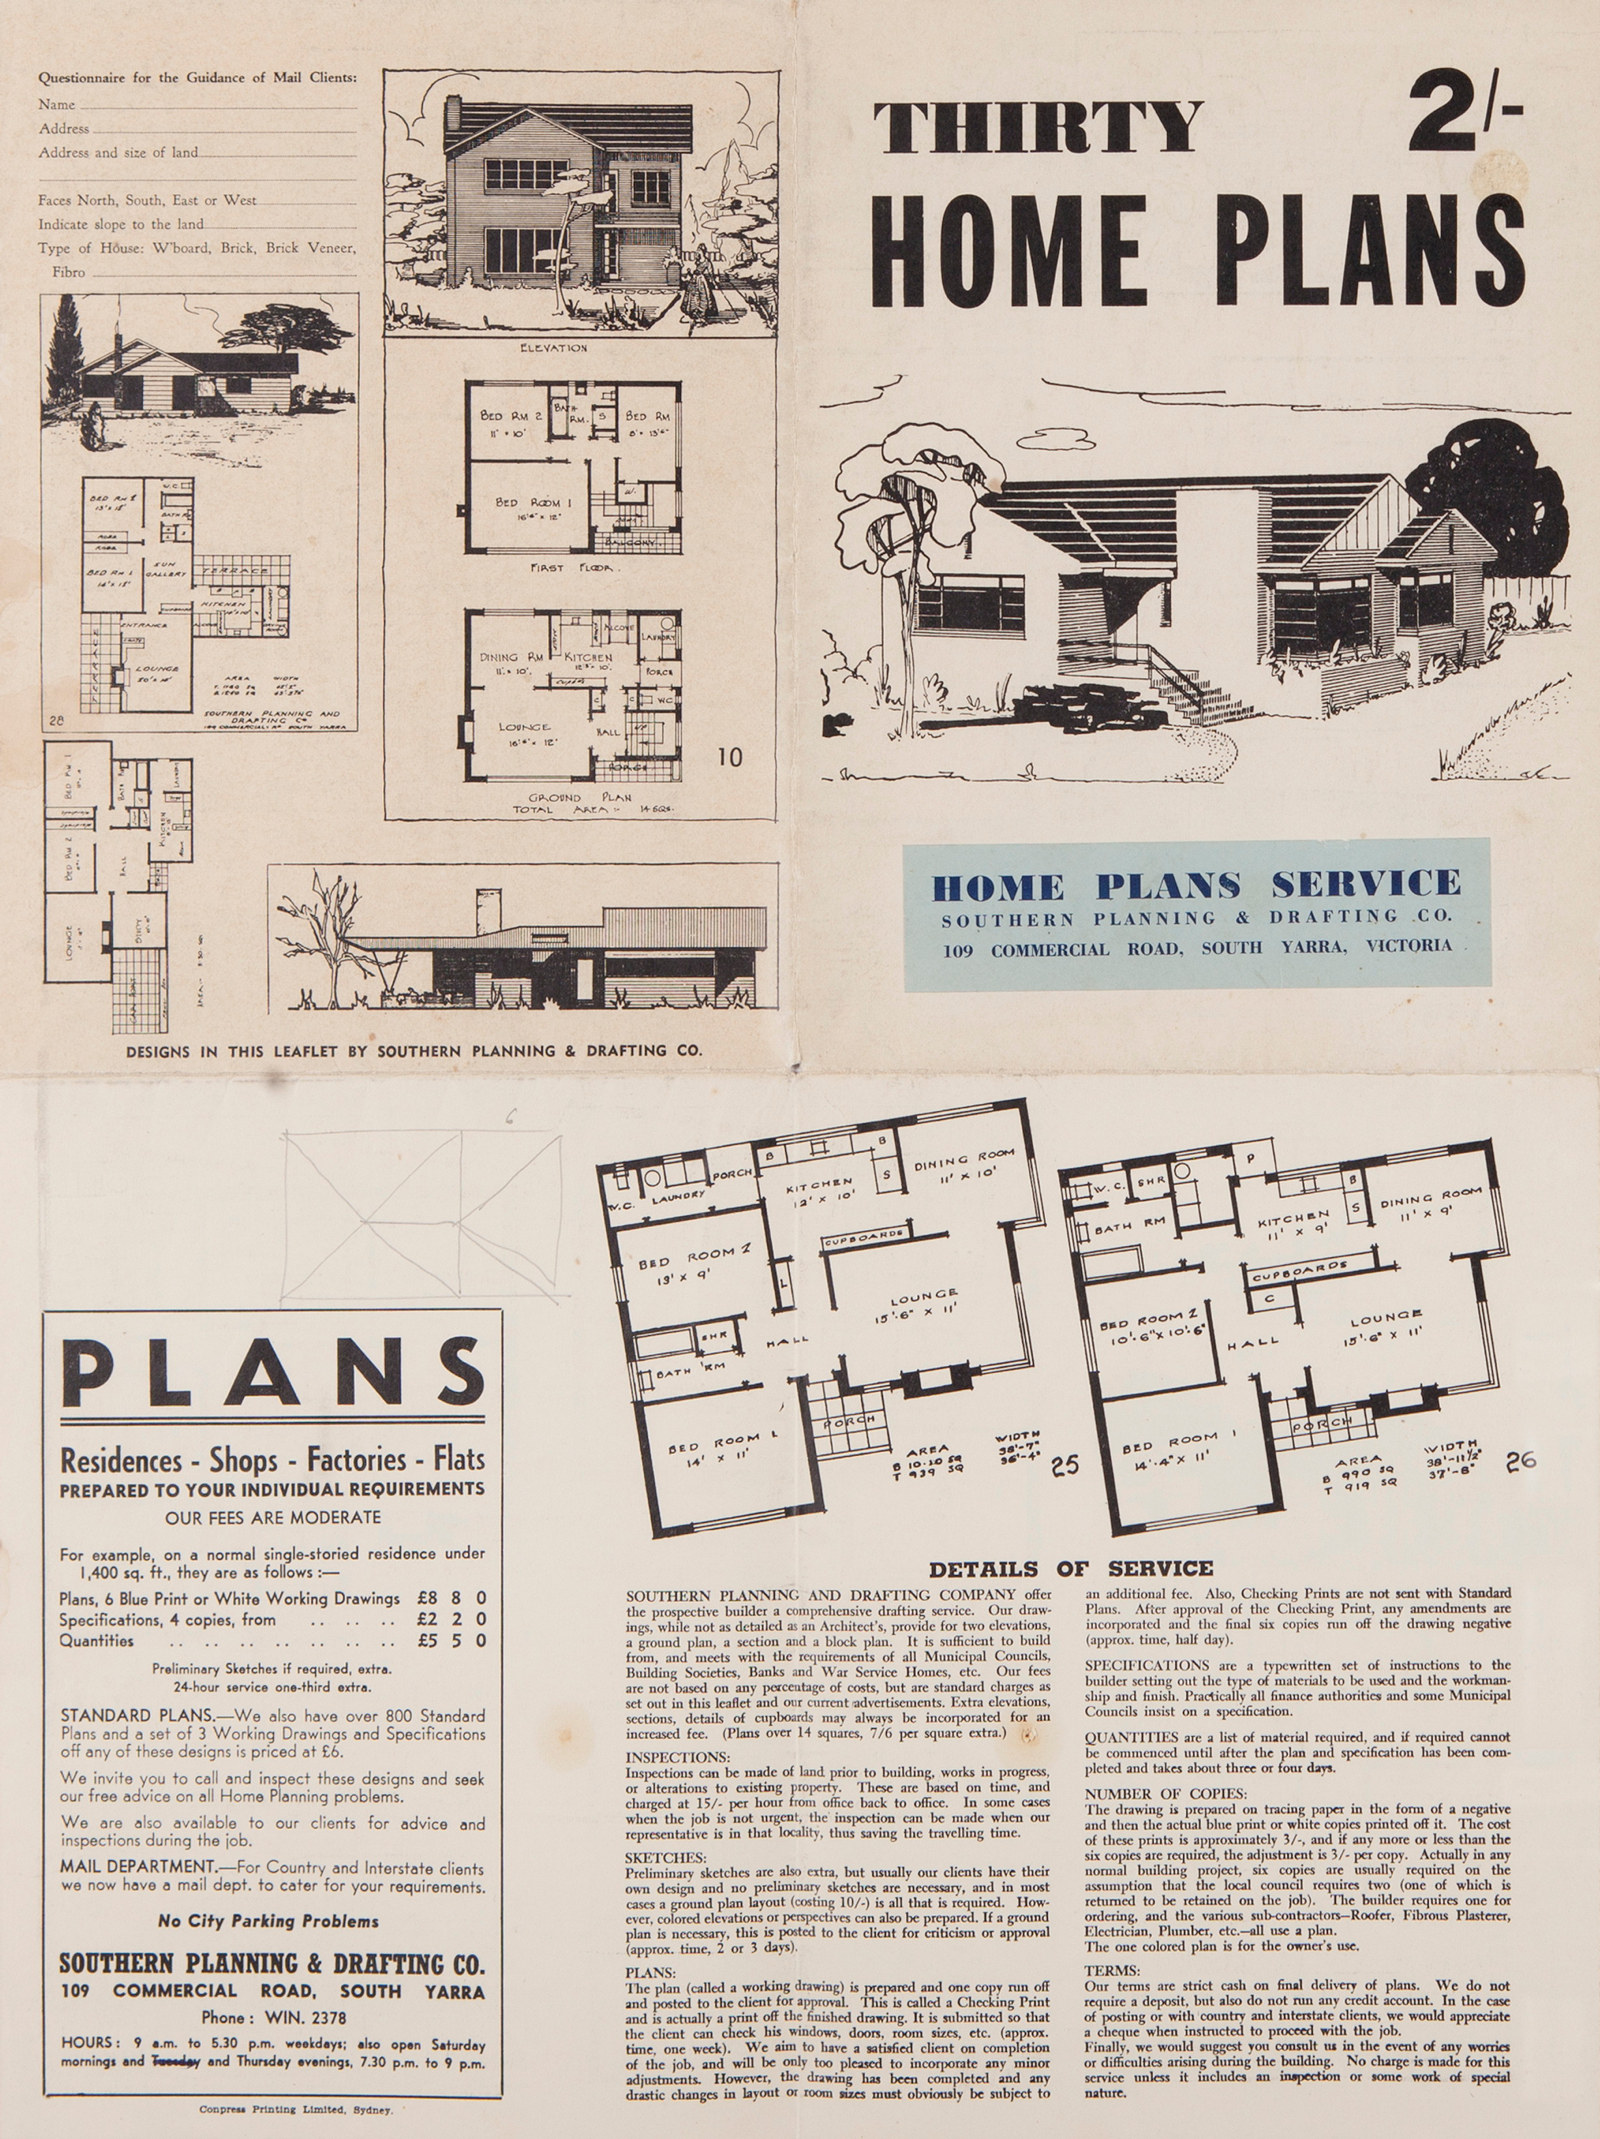 Unfolded catalogue of plans and drawings.